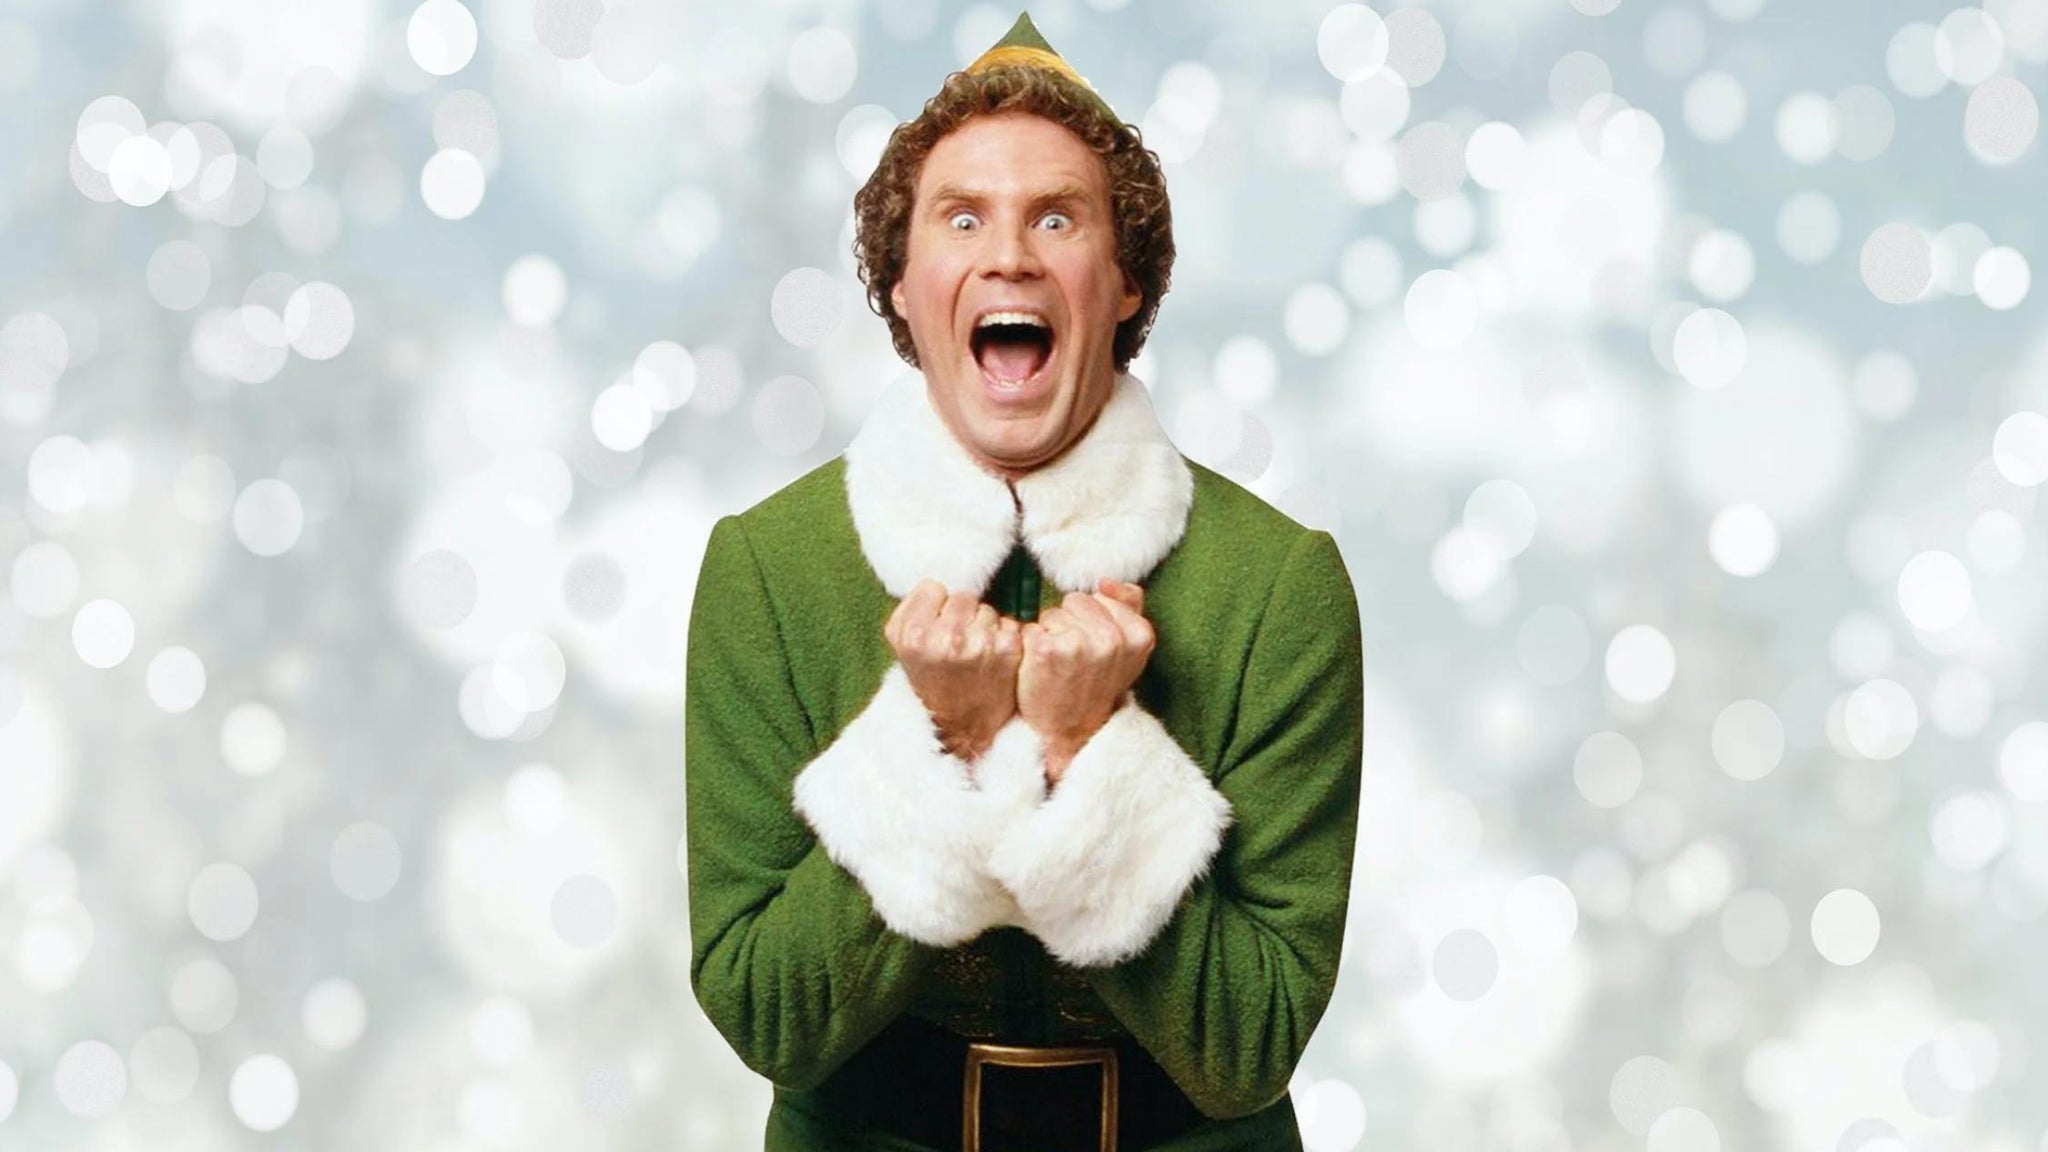 Elf - Christmas Movies at the Crown